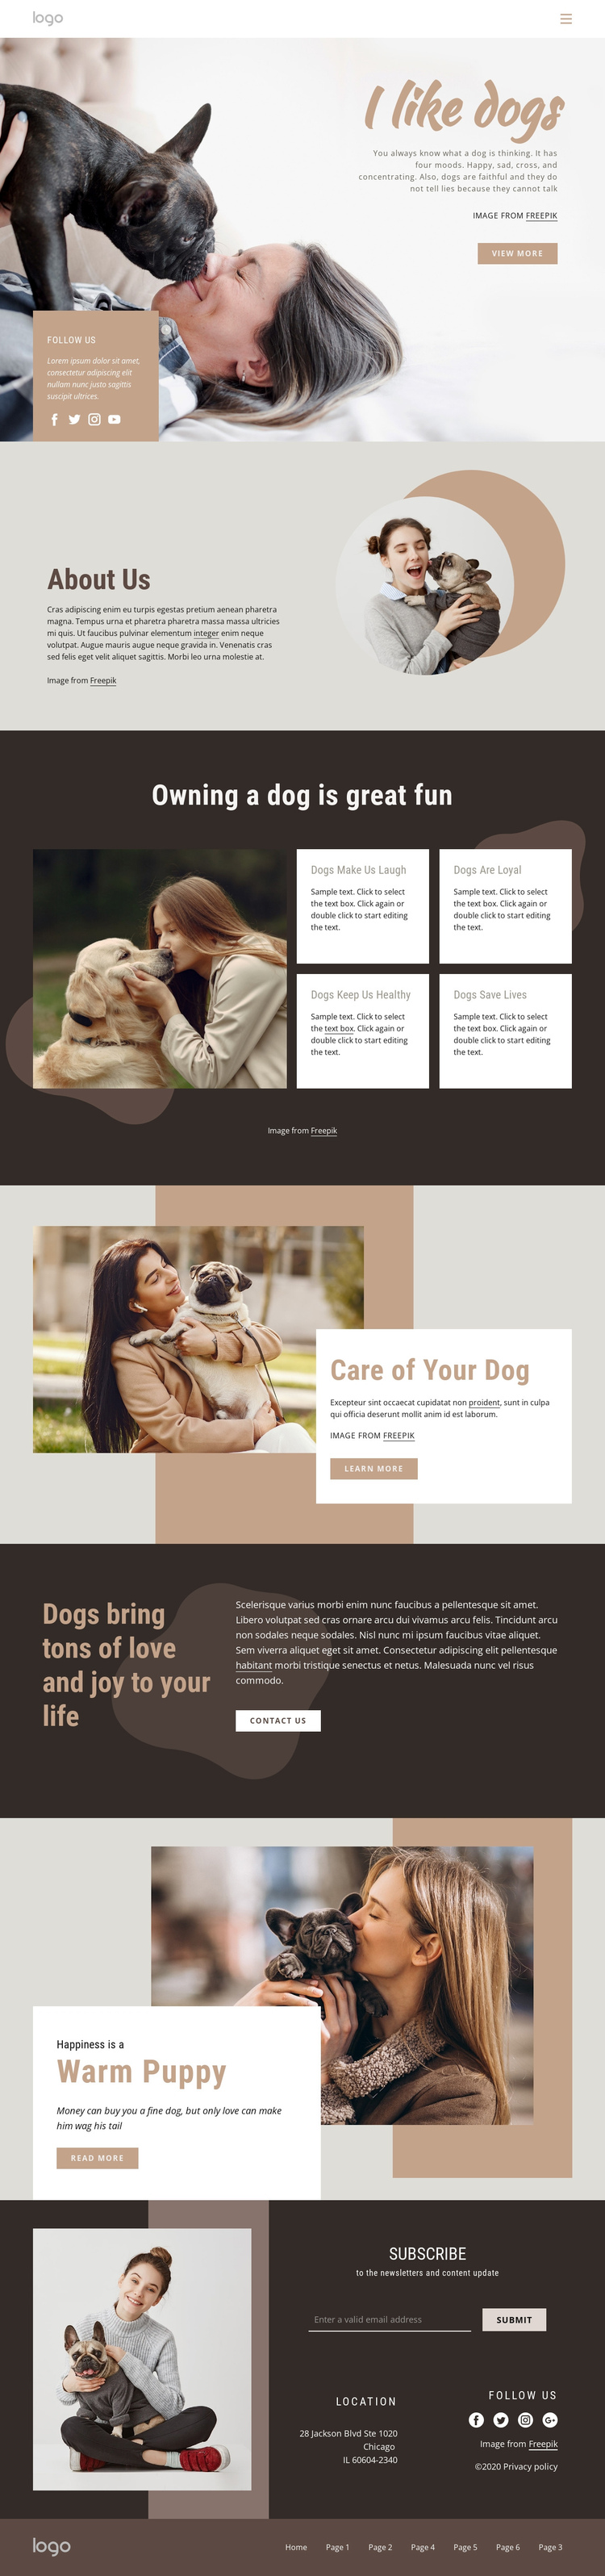 All about dogs Website Builder Software